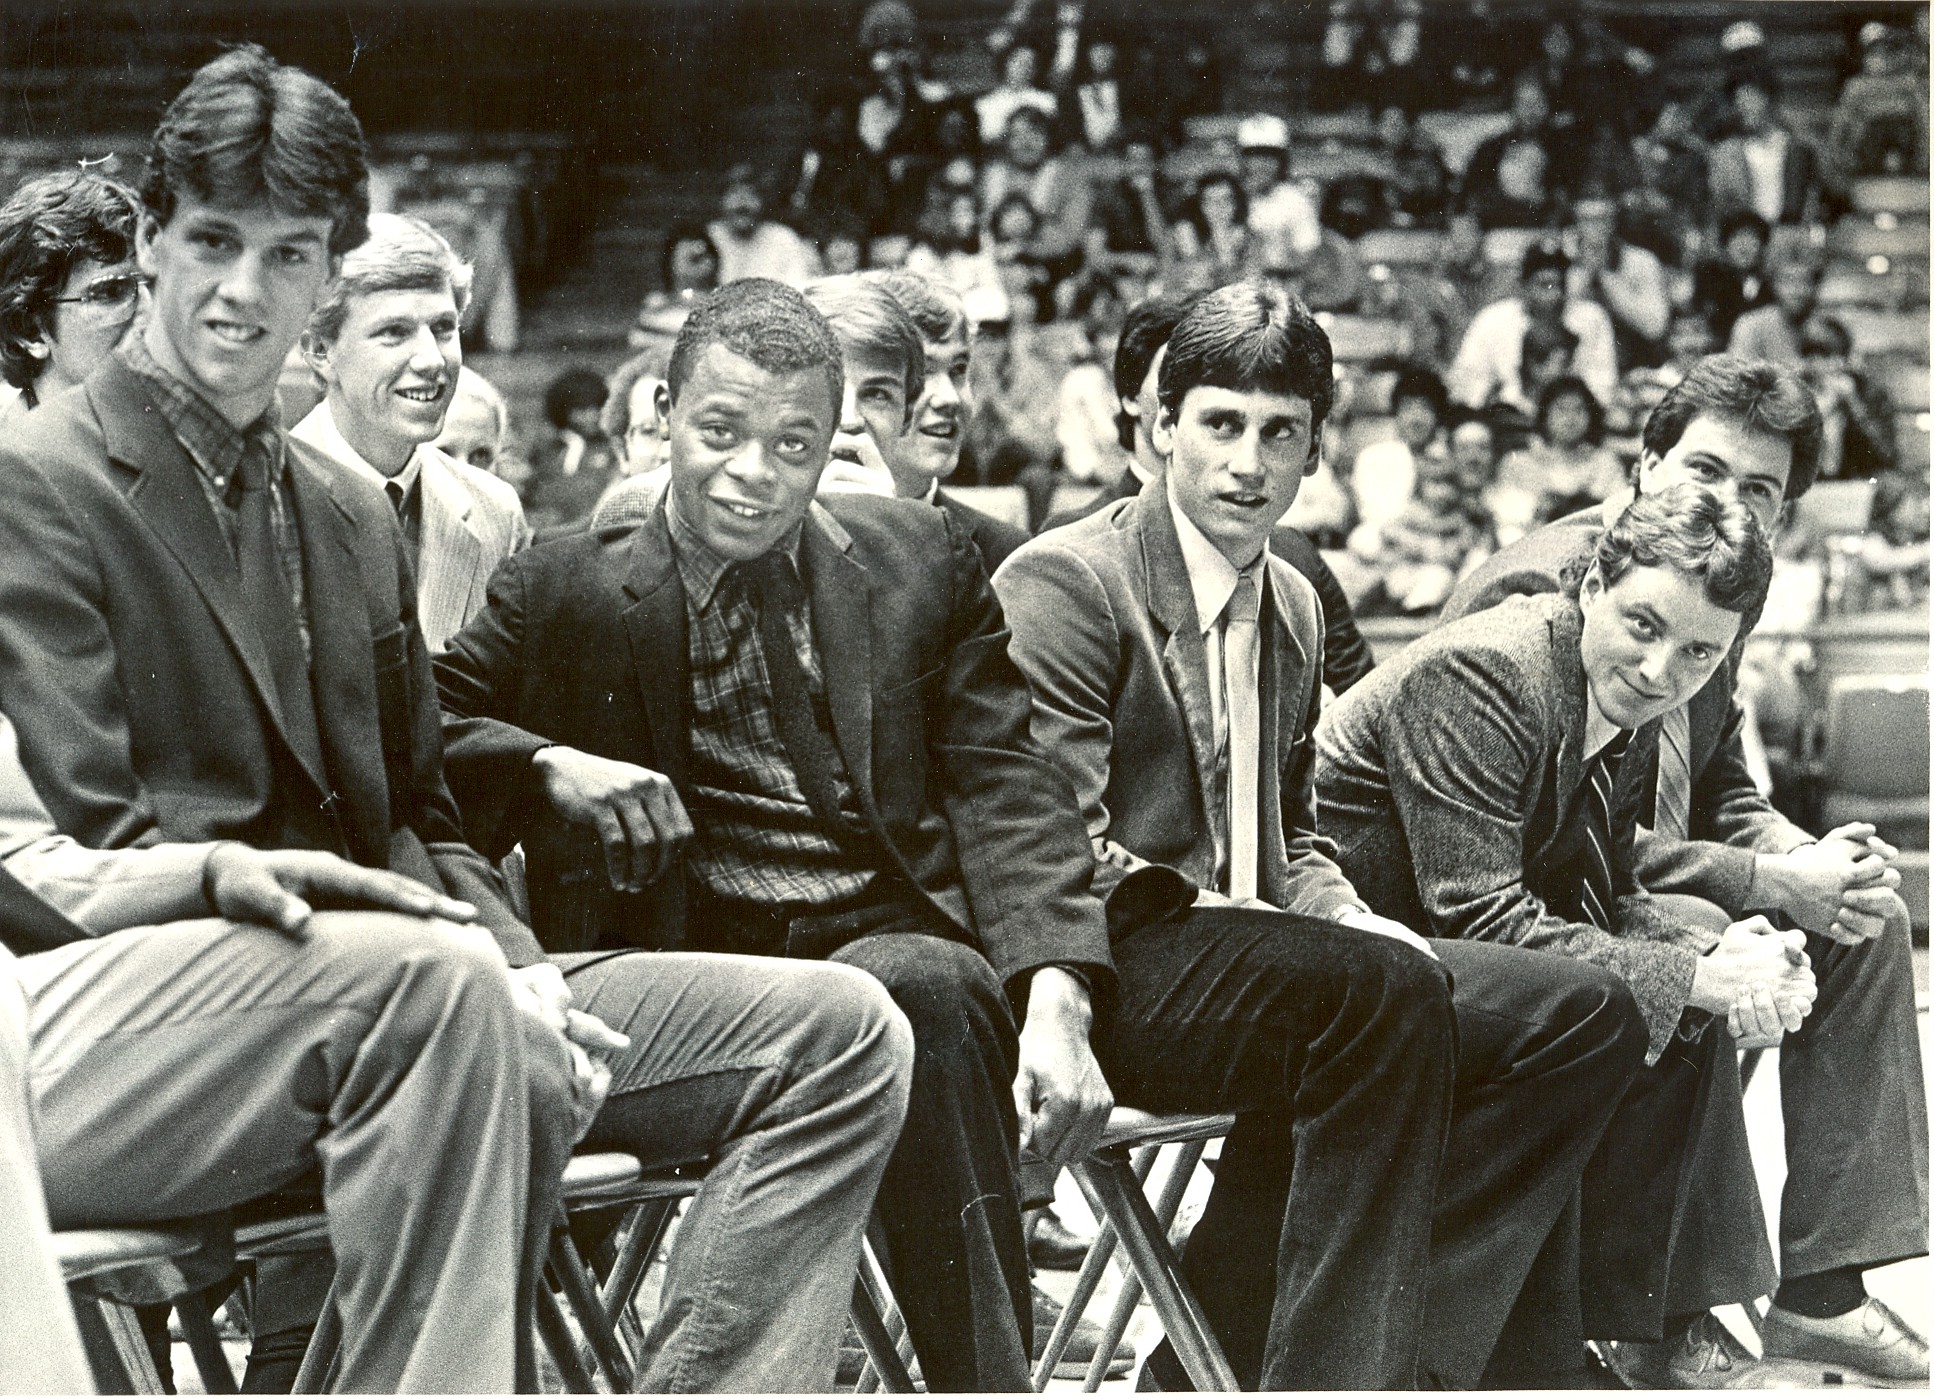 Mar. 26, 1984. UD Basketball team members wear smiles on their faces as they sit before a crowd of more than 3,000 at UD Arena. From left: Larry Schellenberg, Rory Dahlinghaus, Cedric Toney, Dan Christie. 